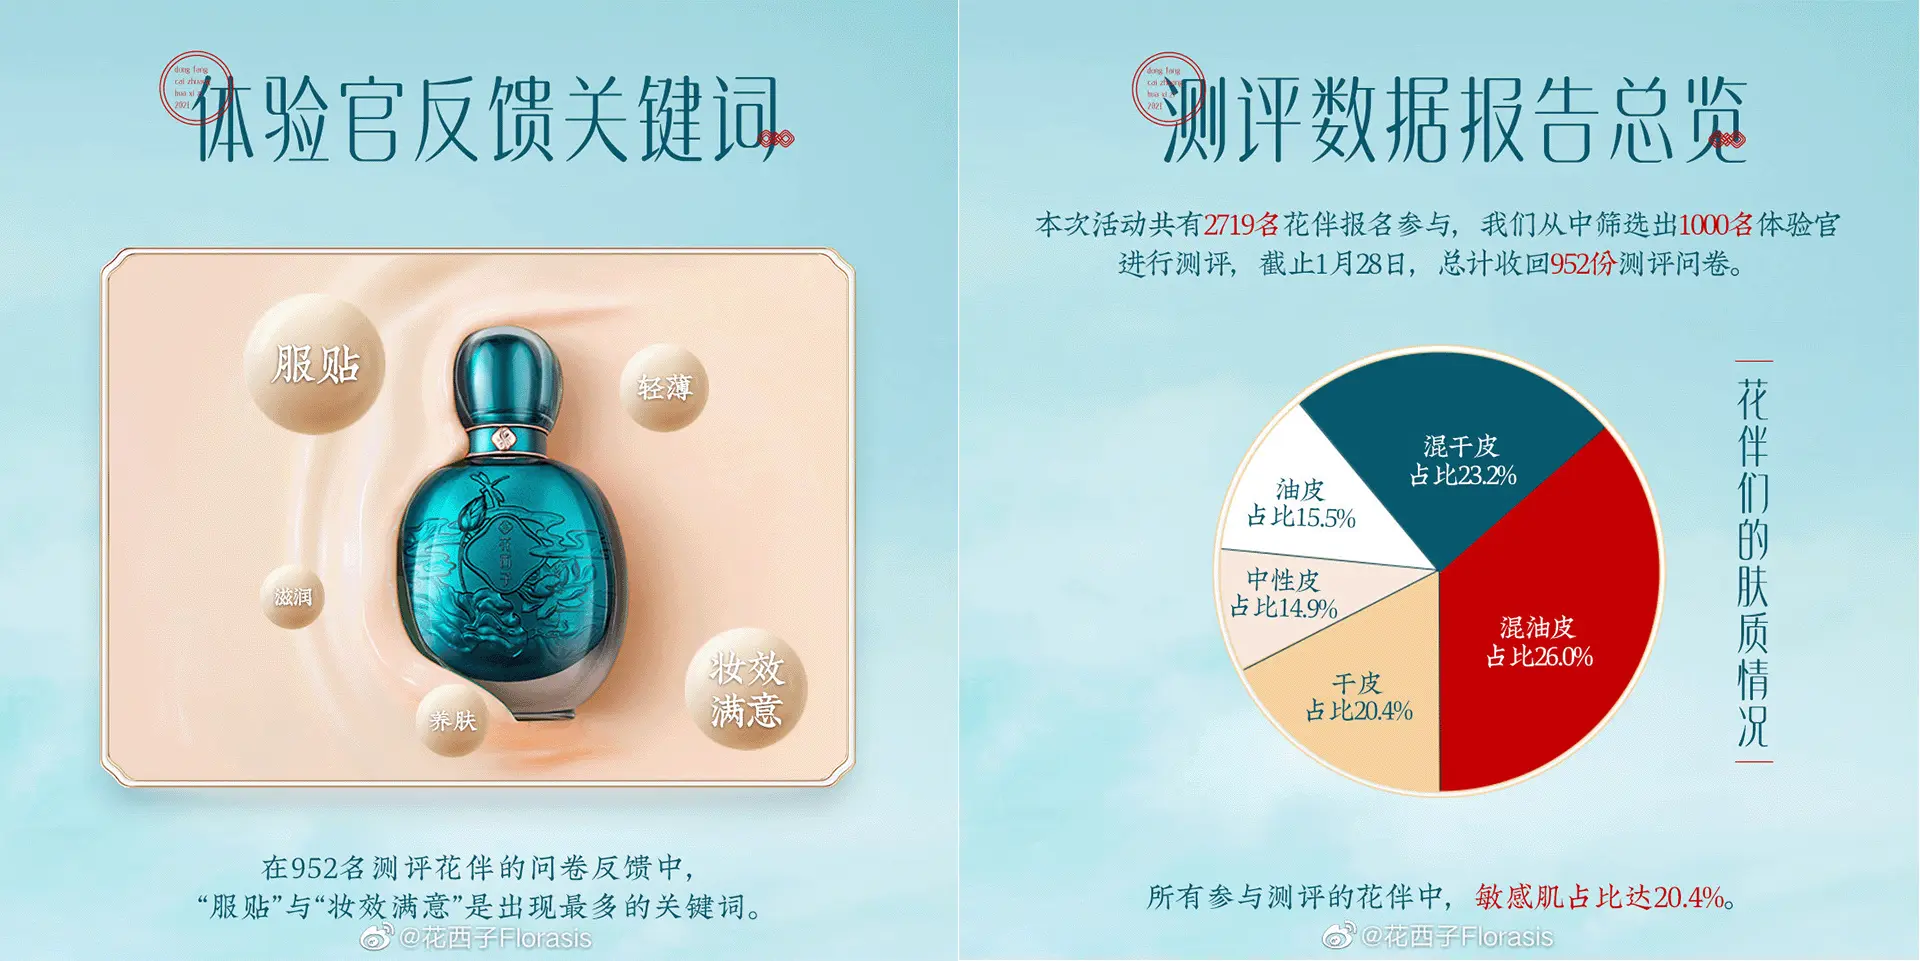 China cosmetic market trend - Florasis co-creation